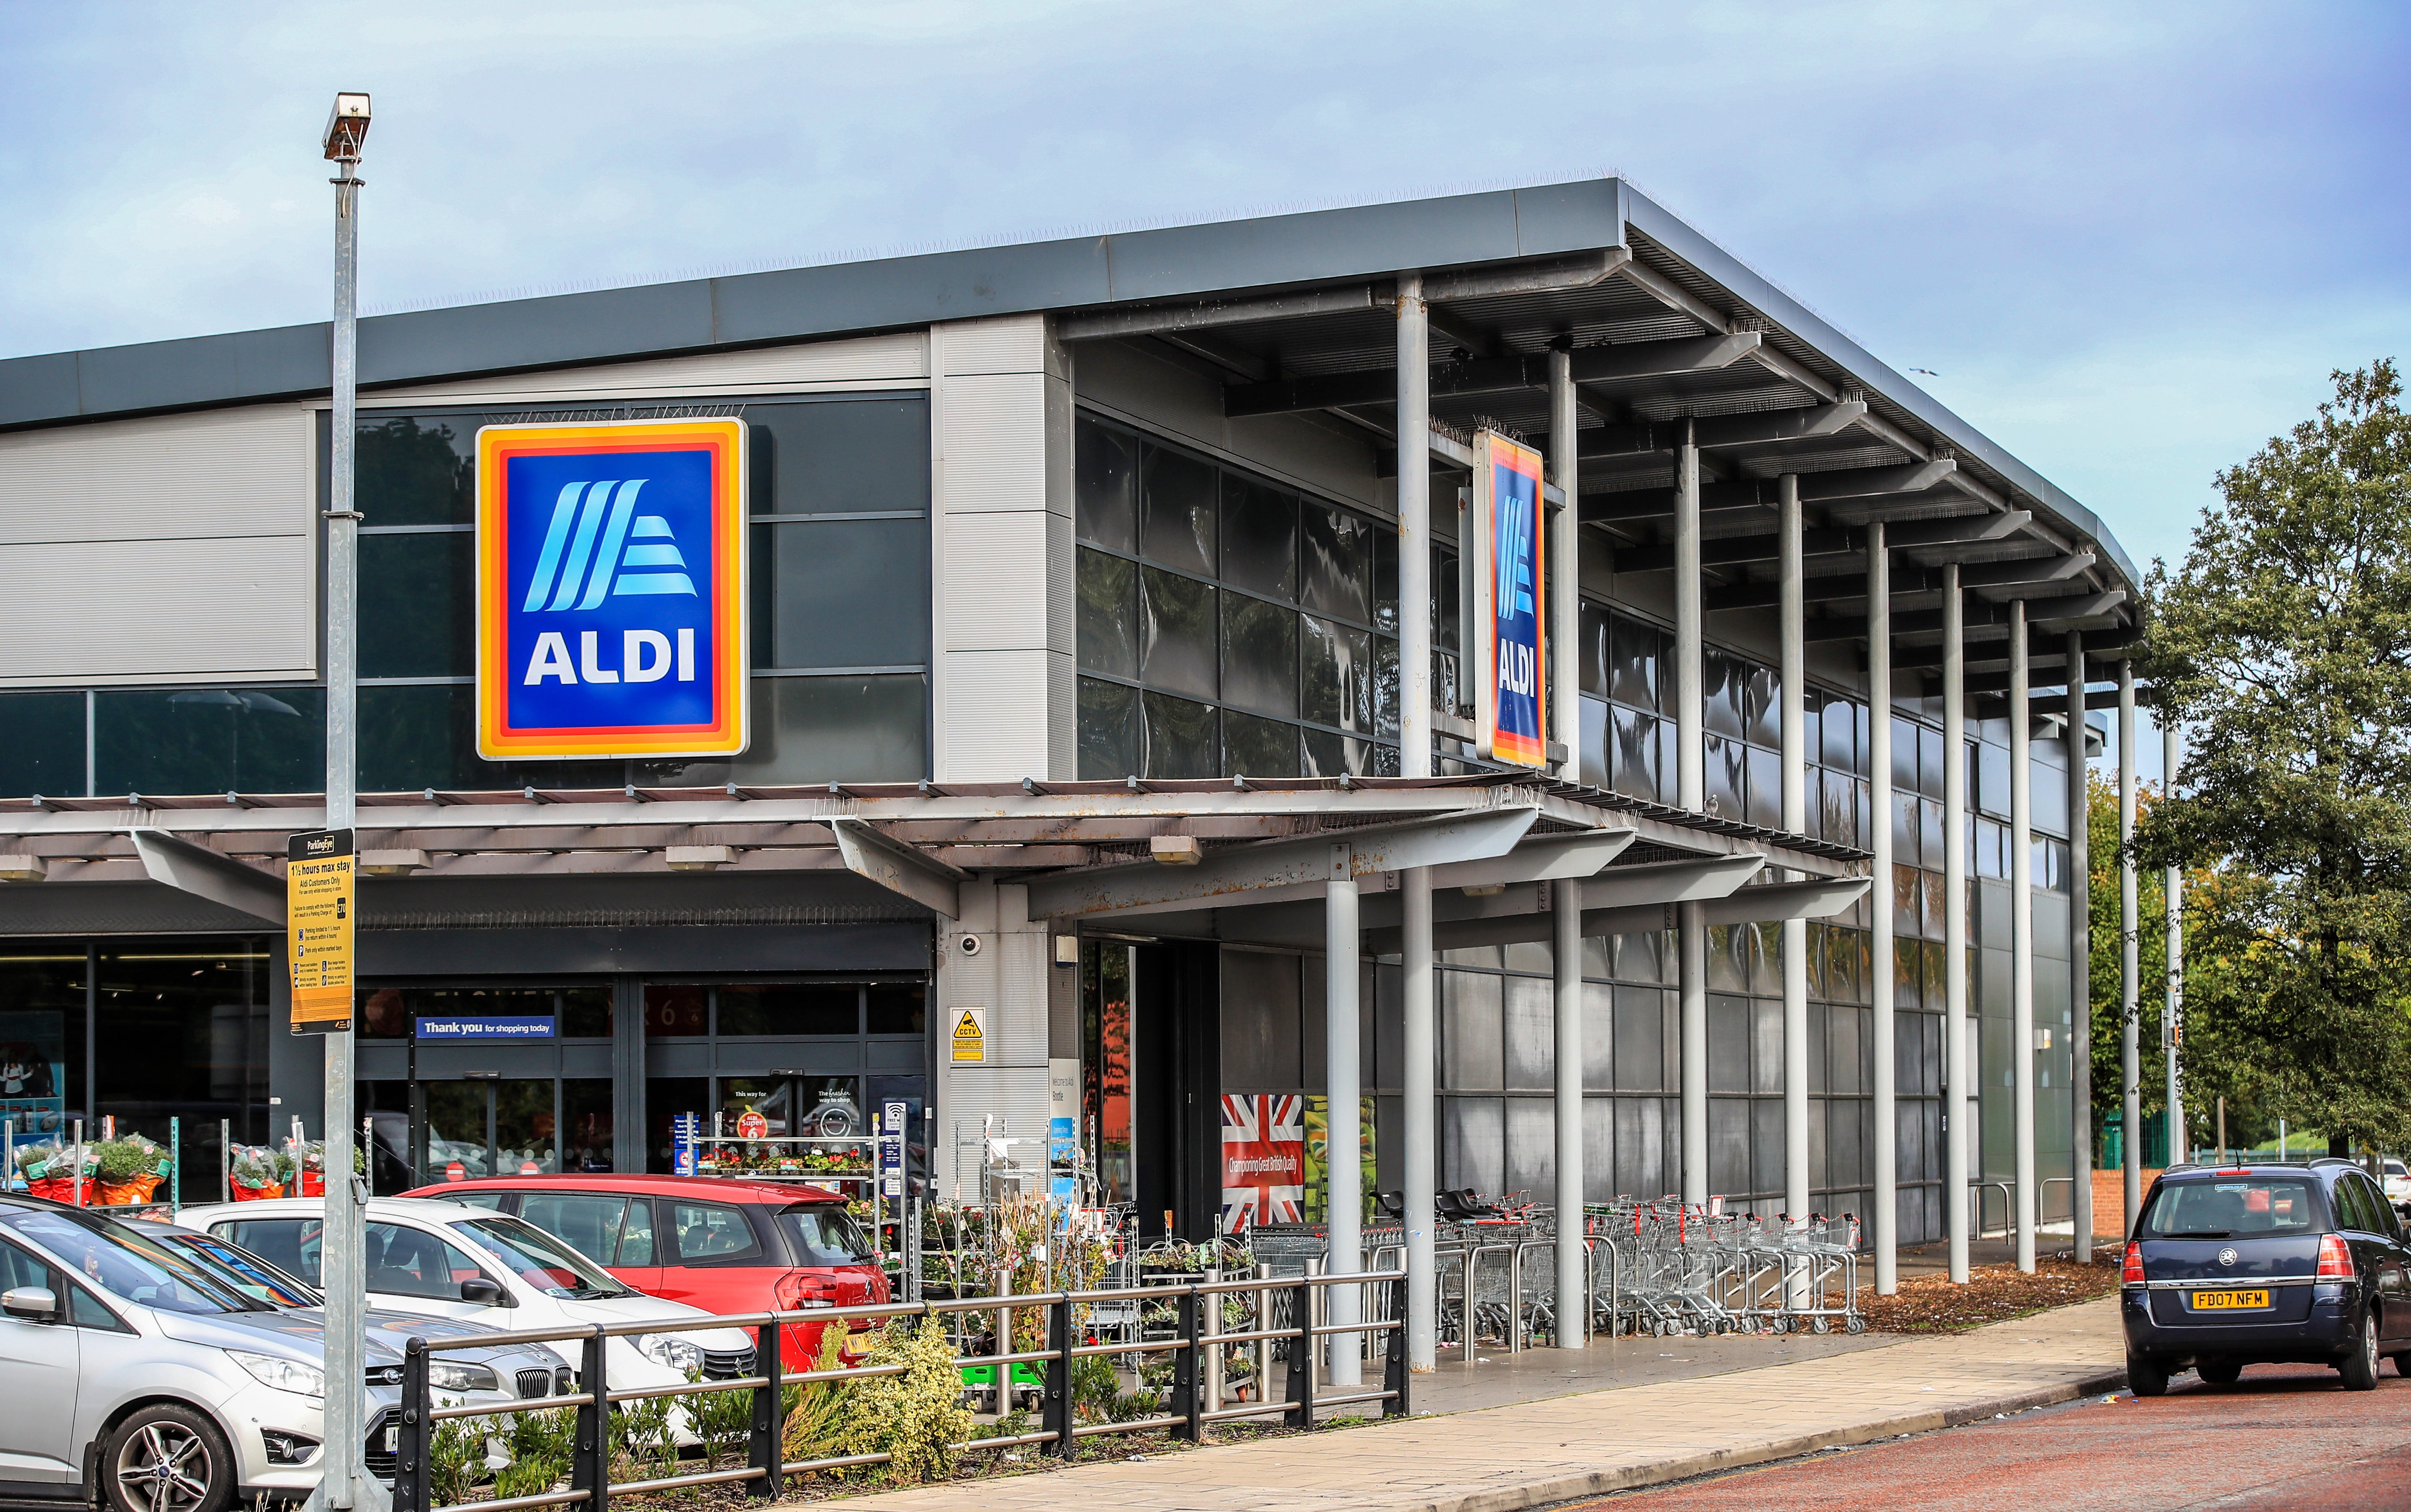 Aldi pledged to prioritise lower prices over short-term profits due to the cost-of-living crisis (Peter Byrne/PA)